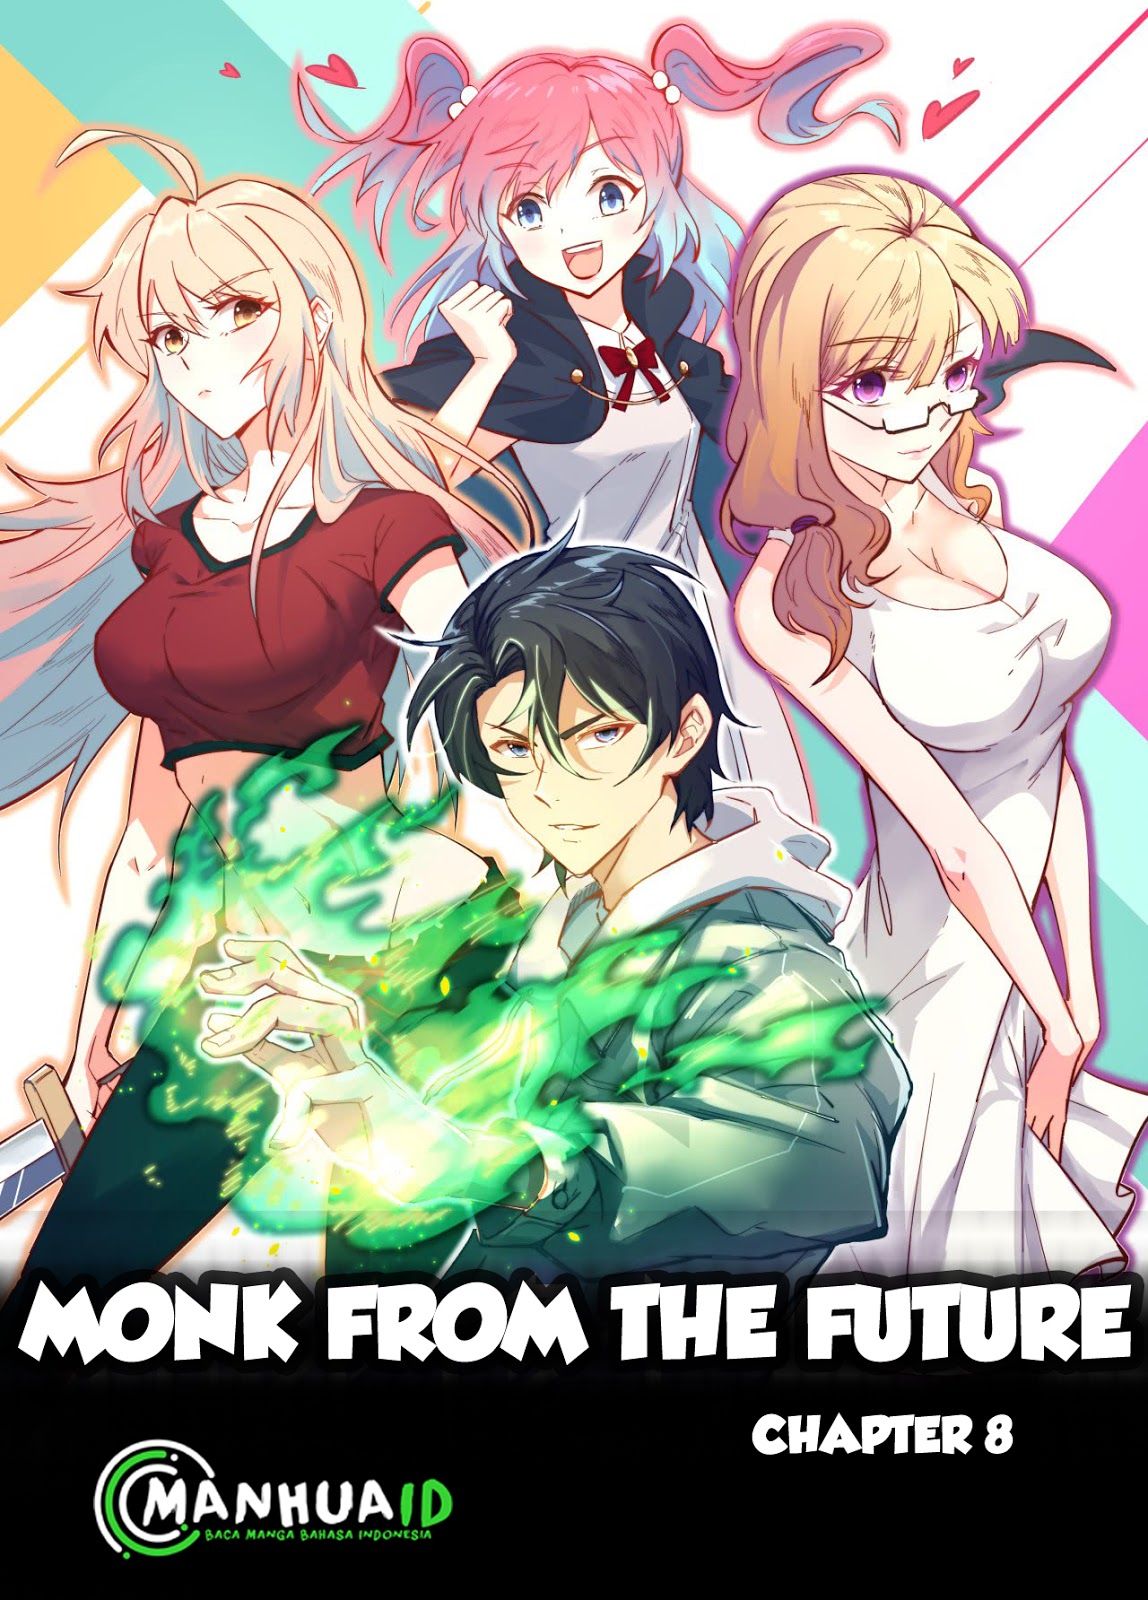 Monk From the Future Chapter 8